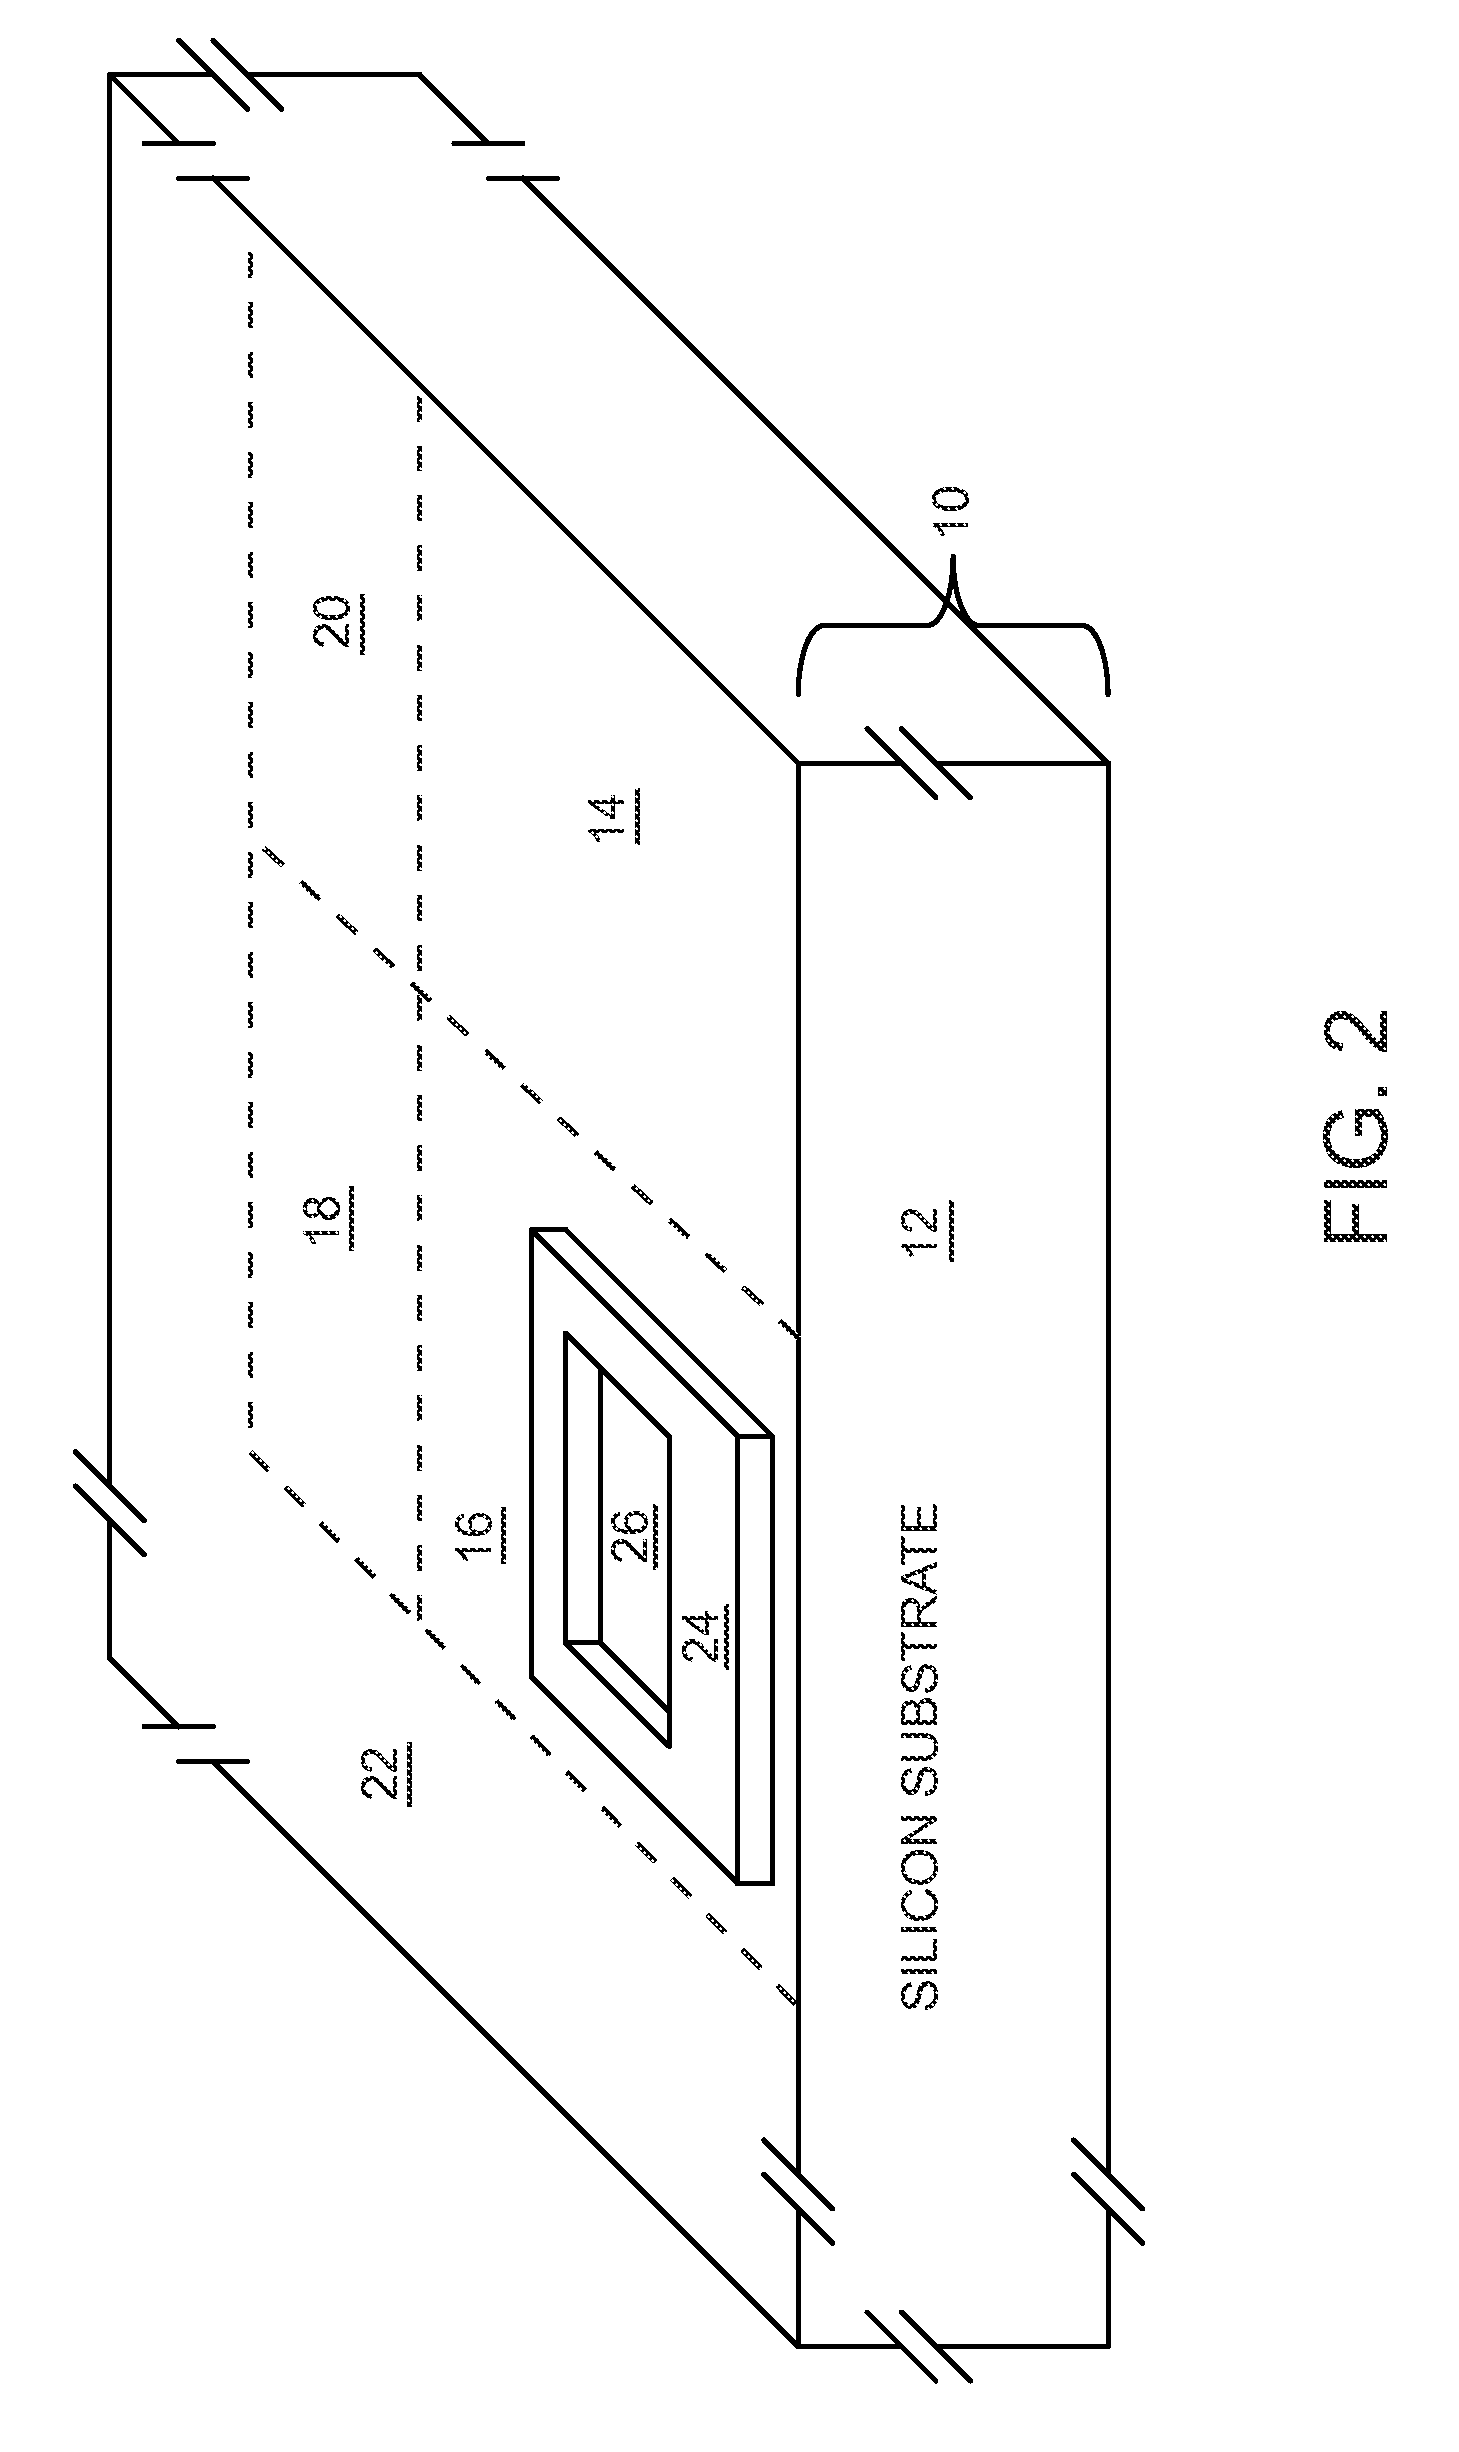 Linearity improvements of semiconductor substrate using passivation